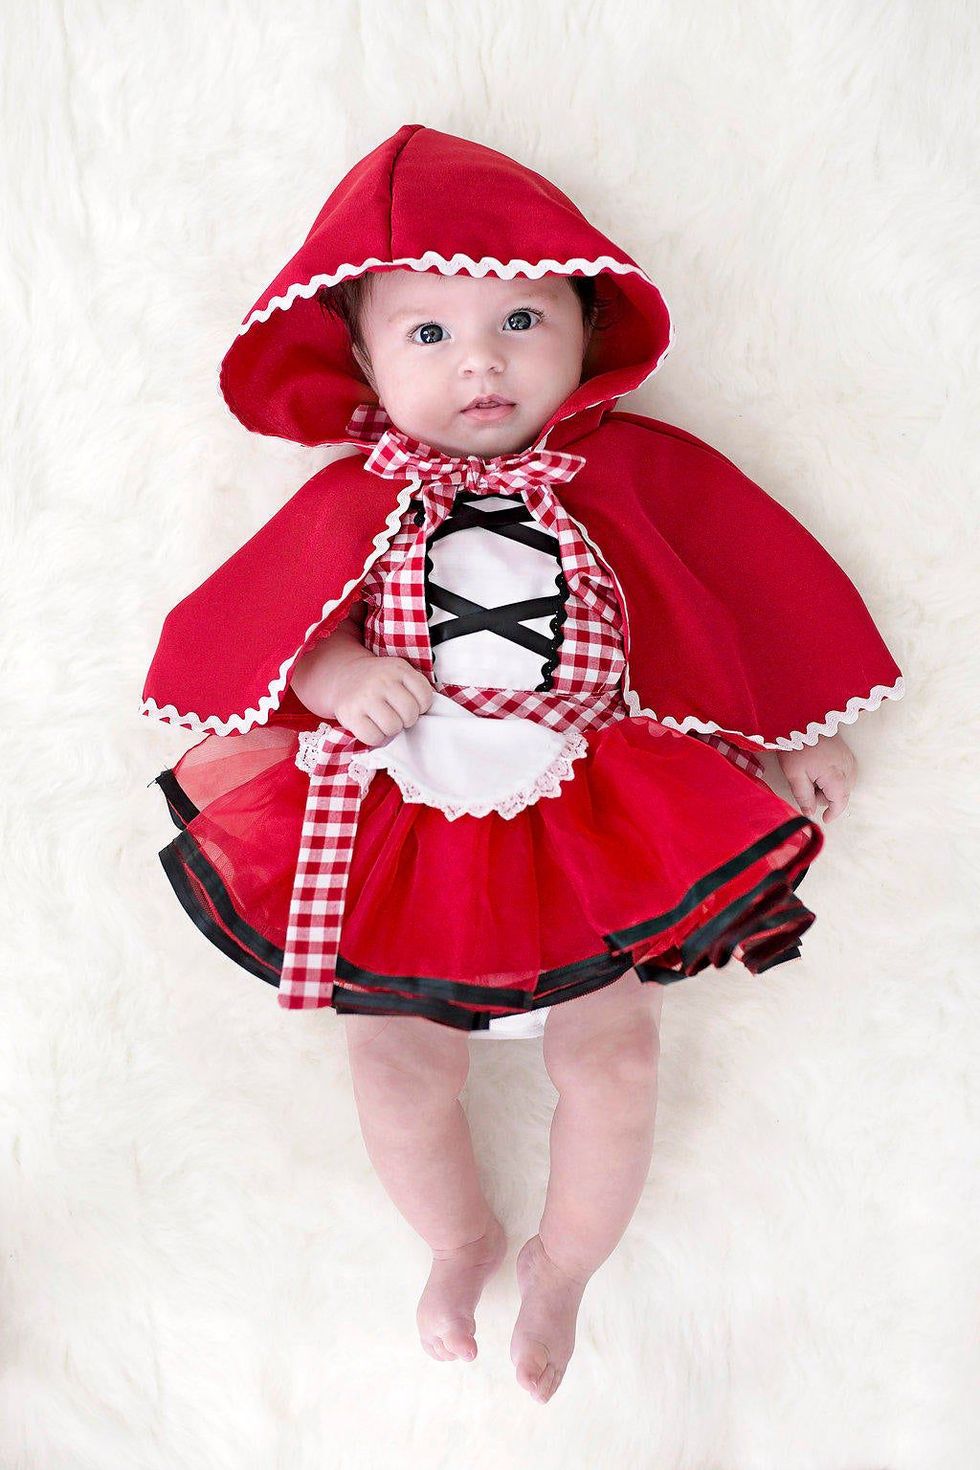 Baby Red Riding Hood Costume